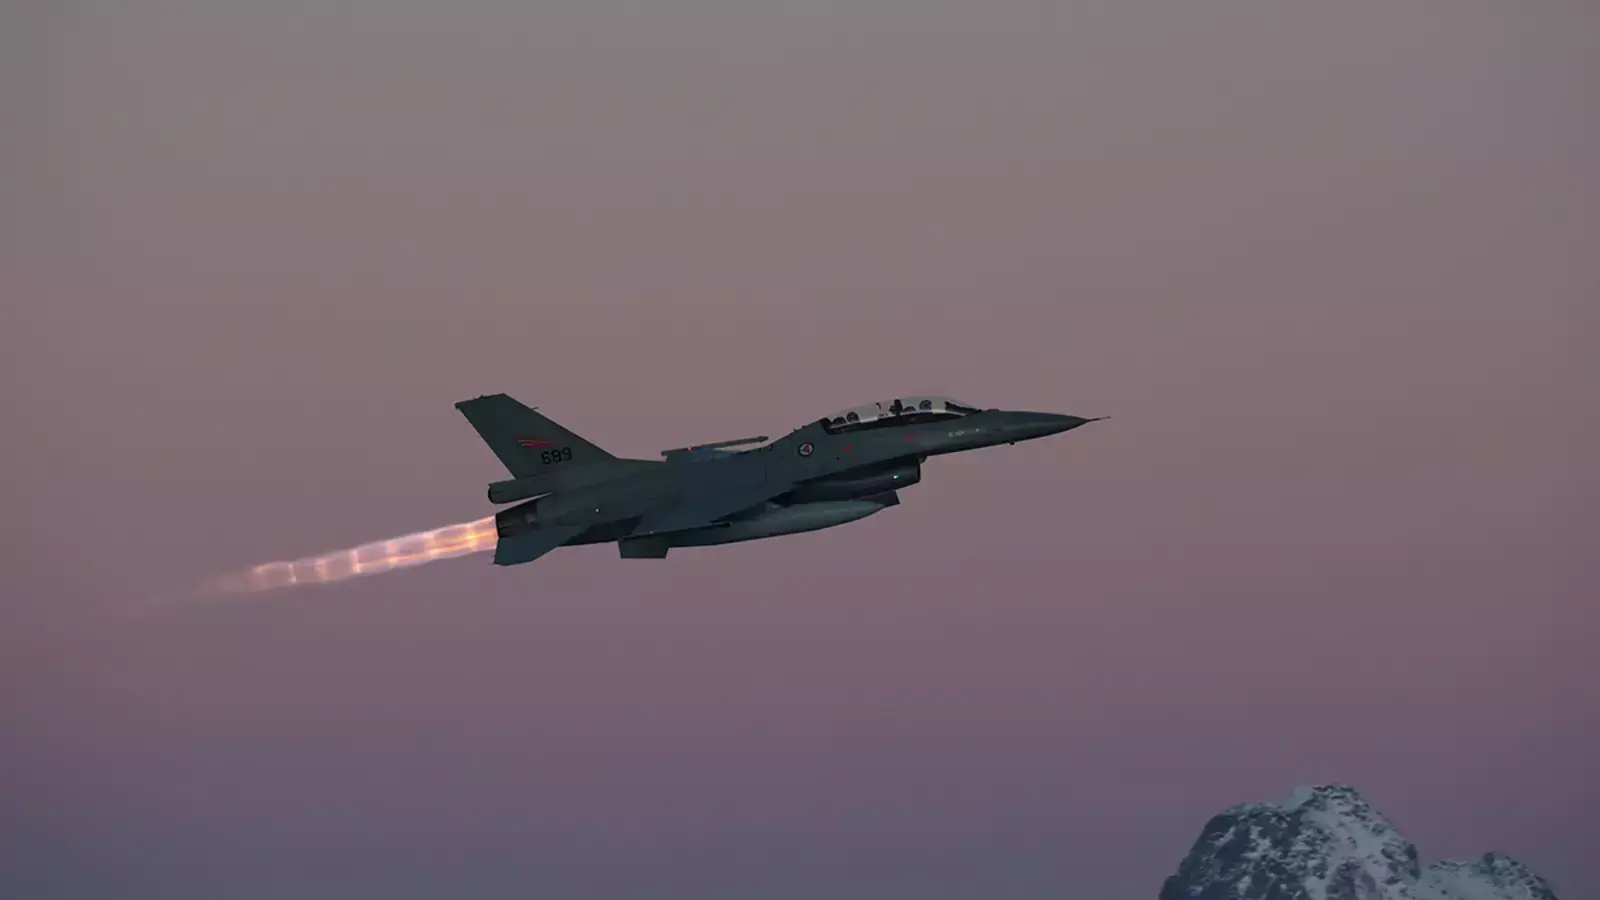 A U.S.-made F-16 aircraft takes off from Bodø airport, Norway.